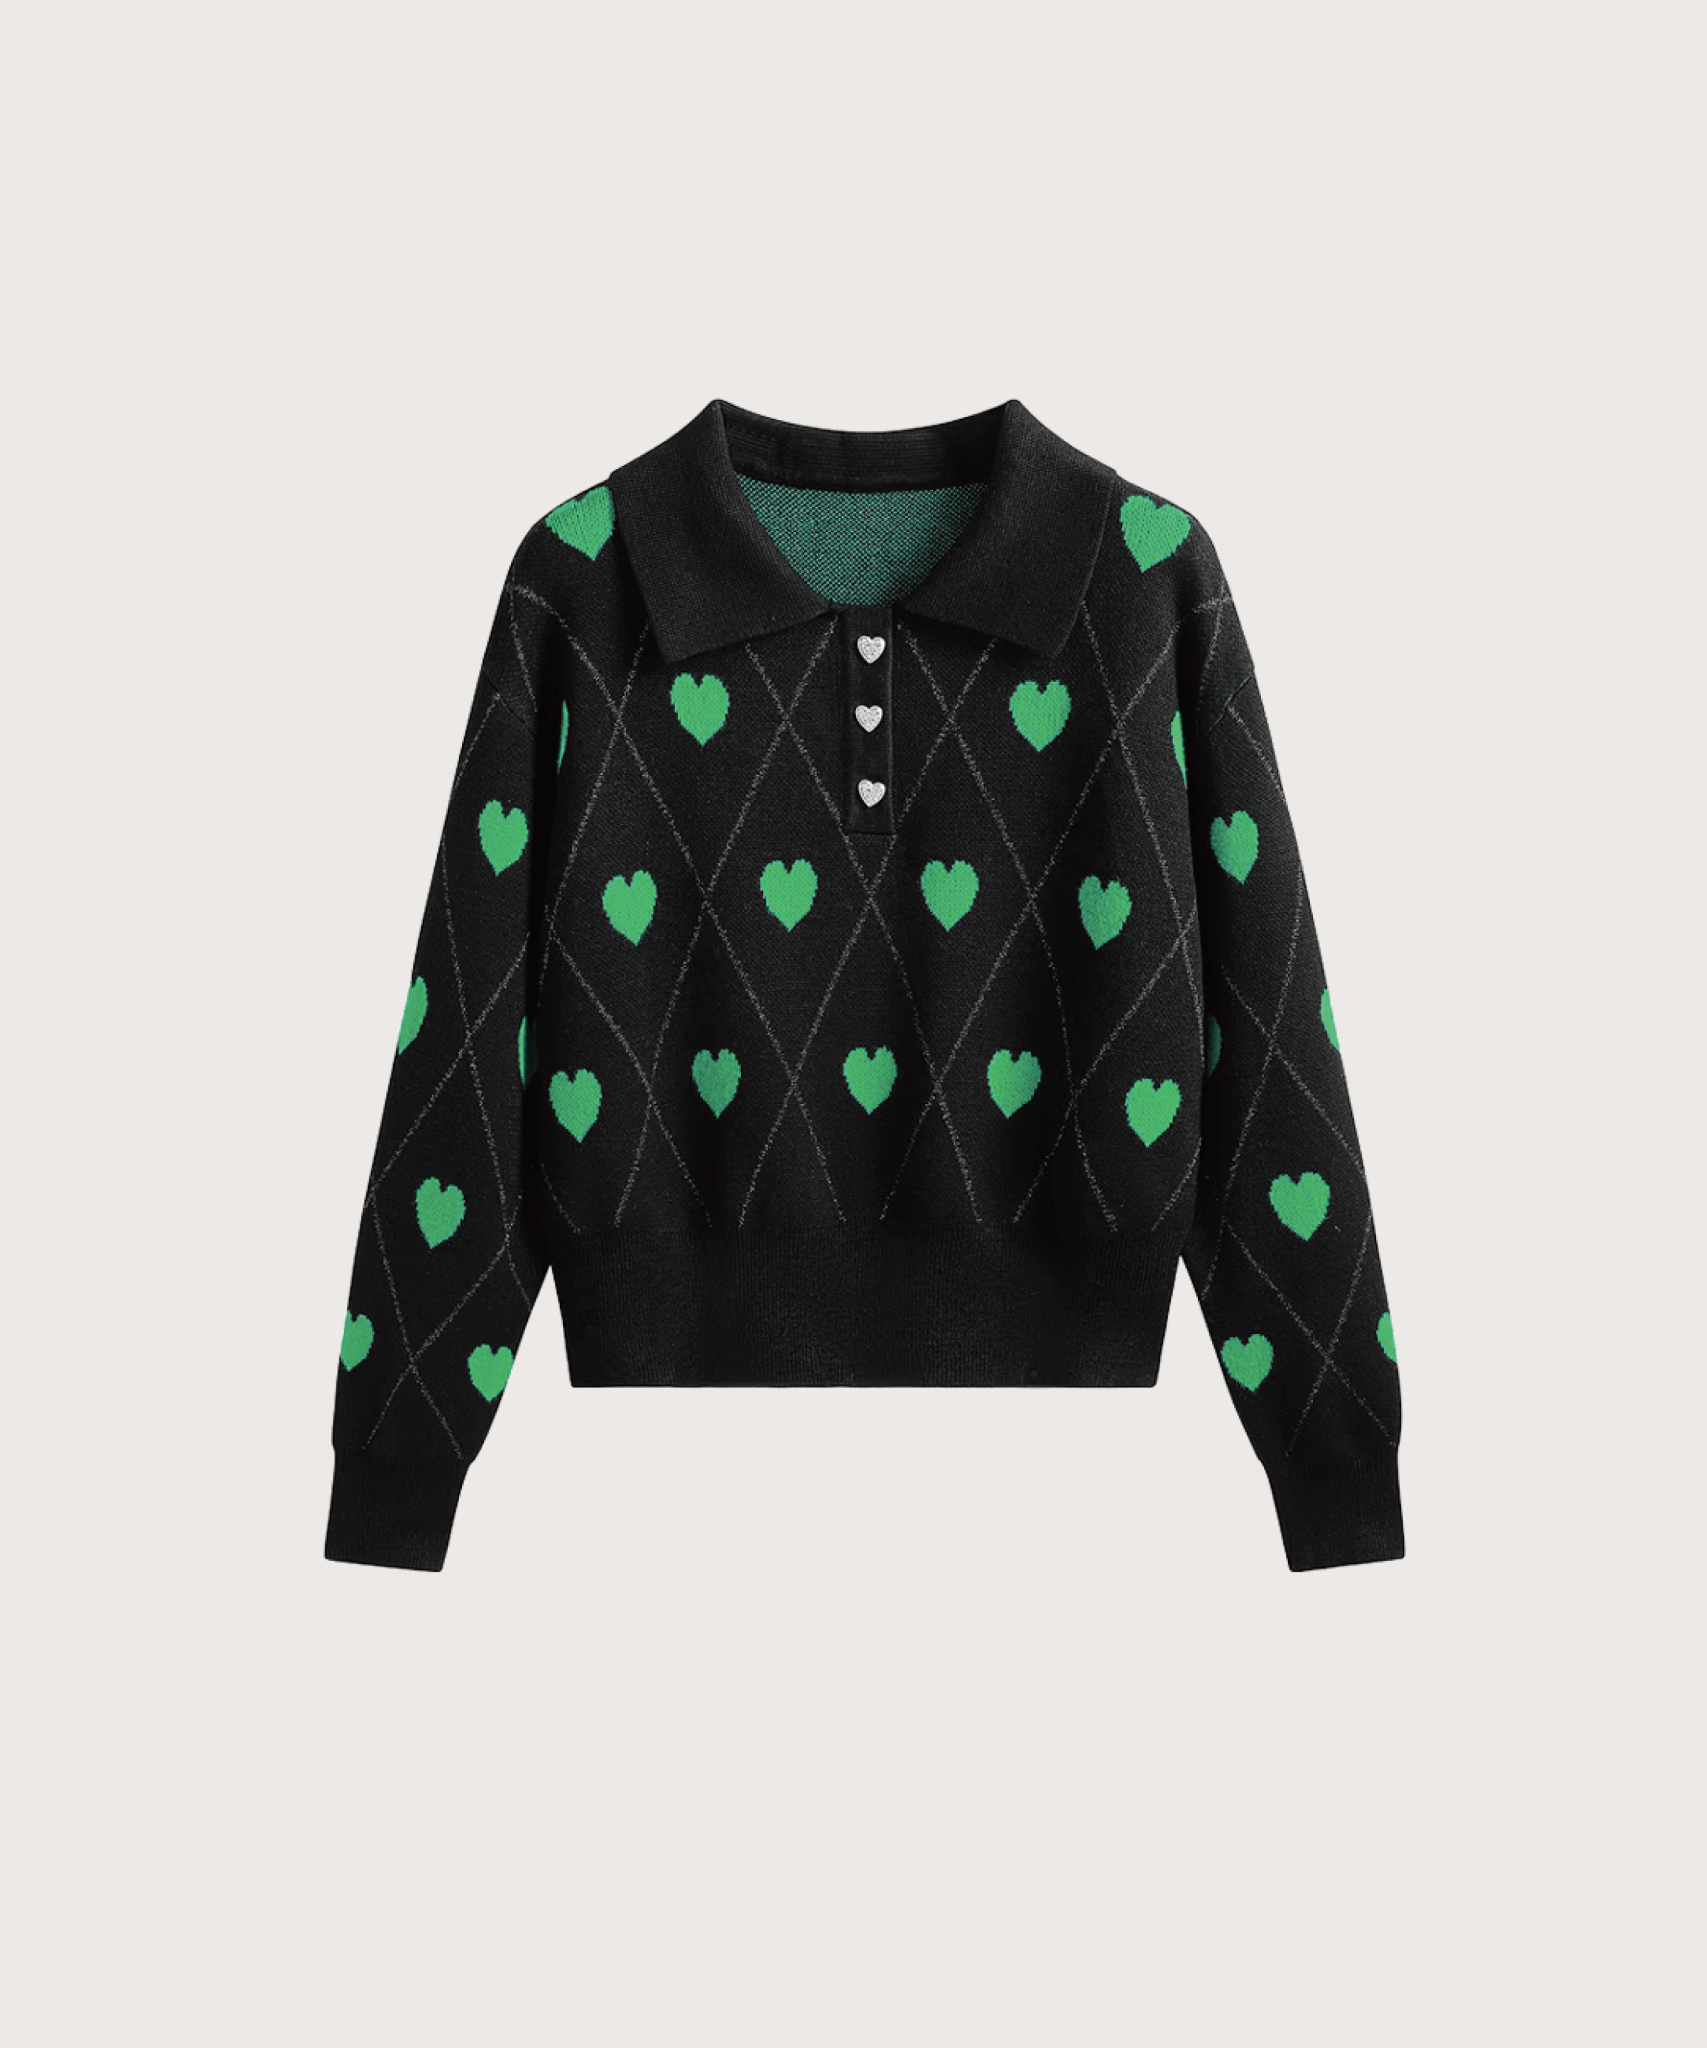 Argyle Heart Embroidery Knit